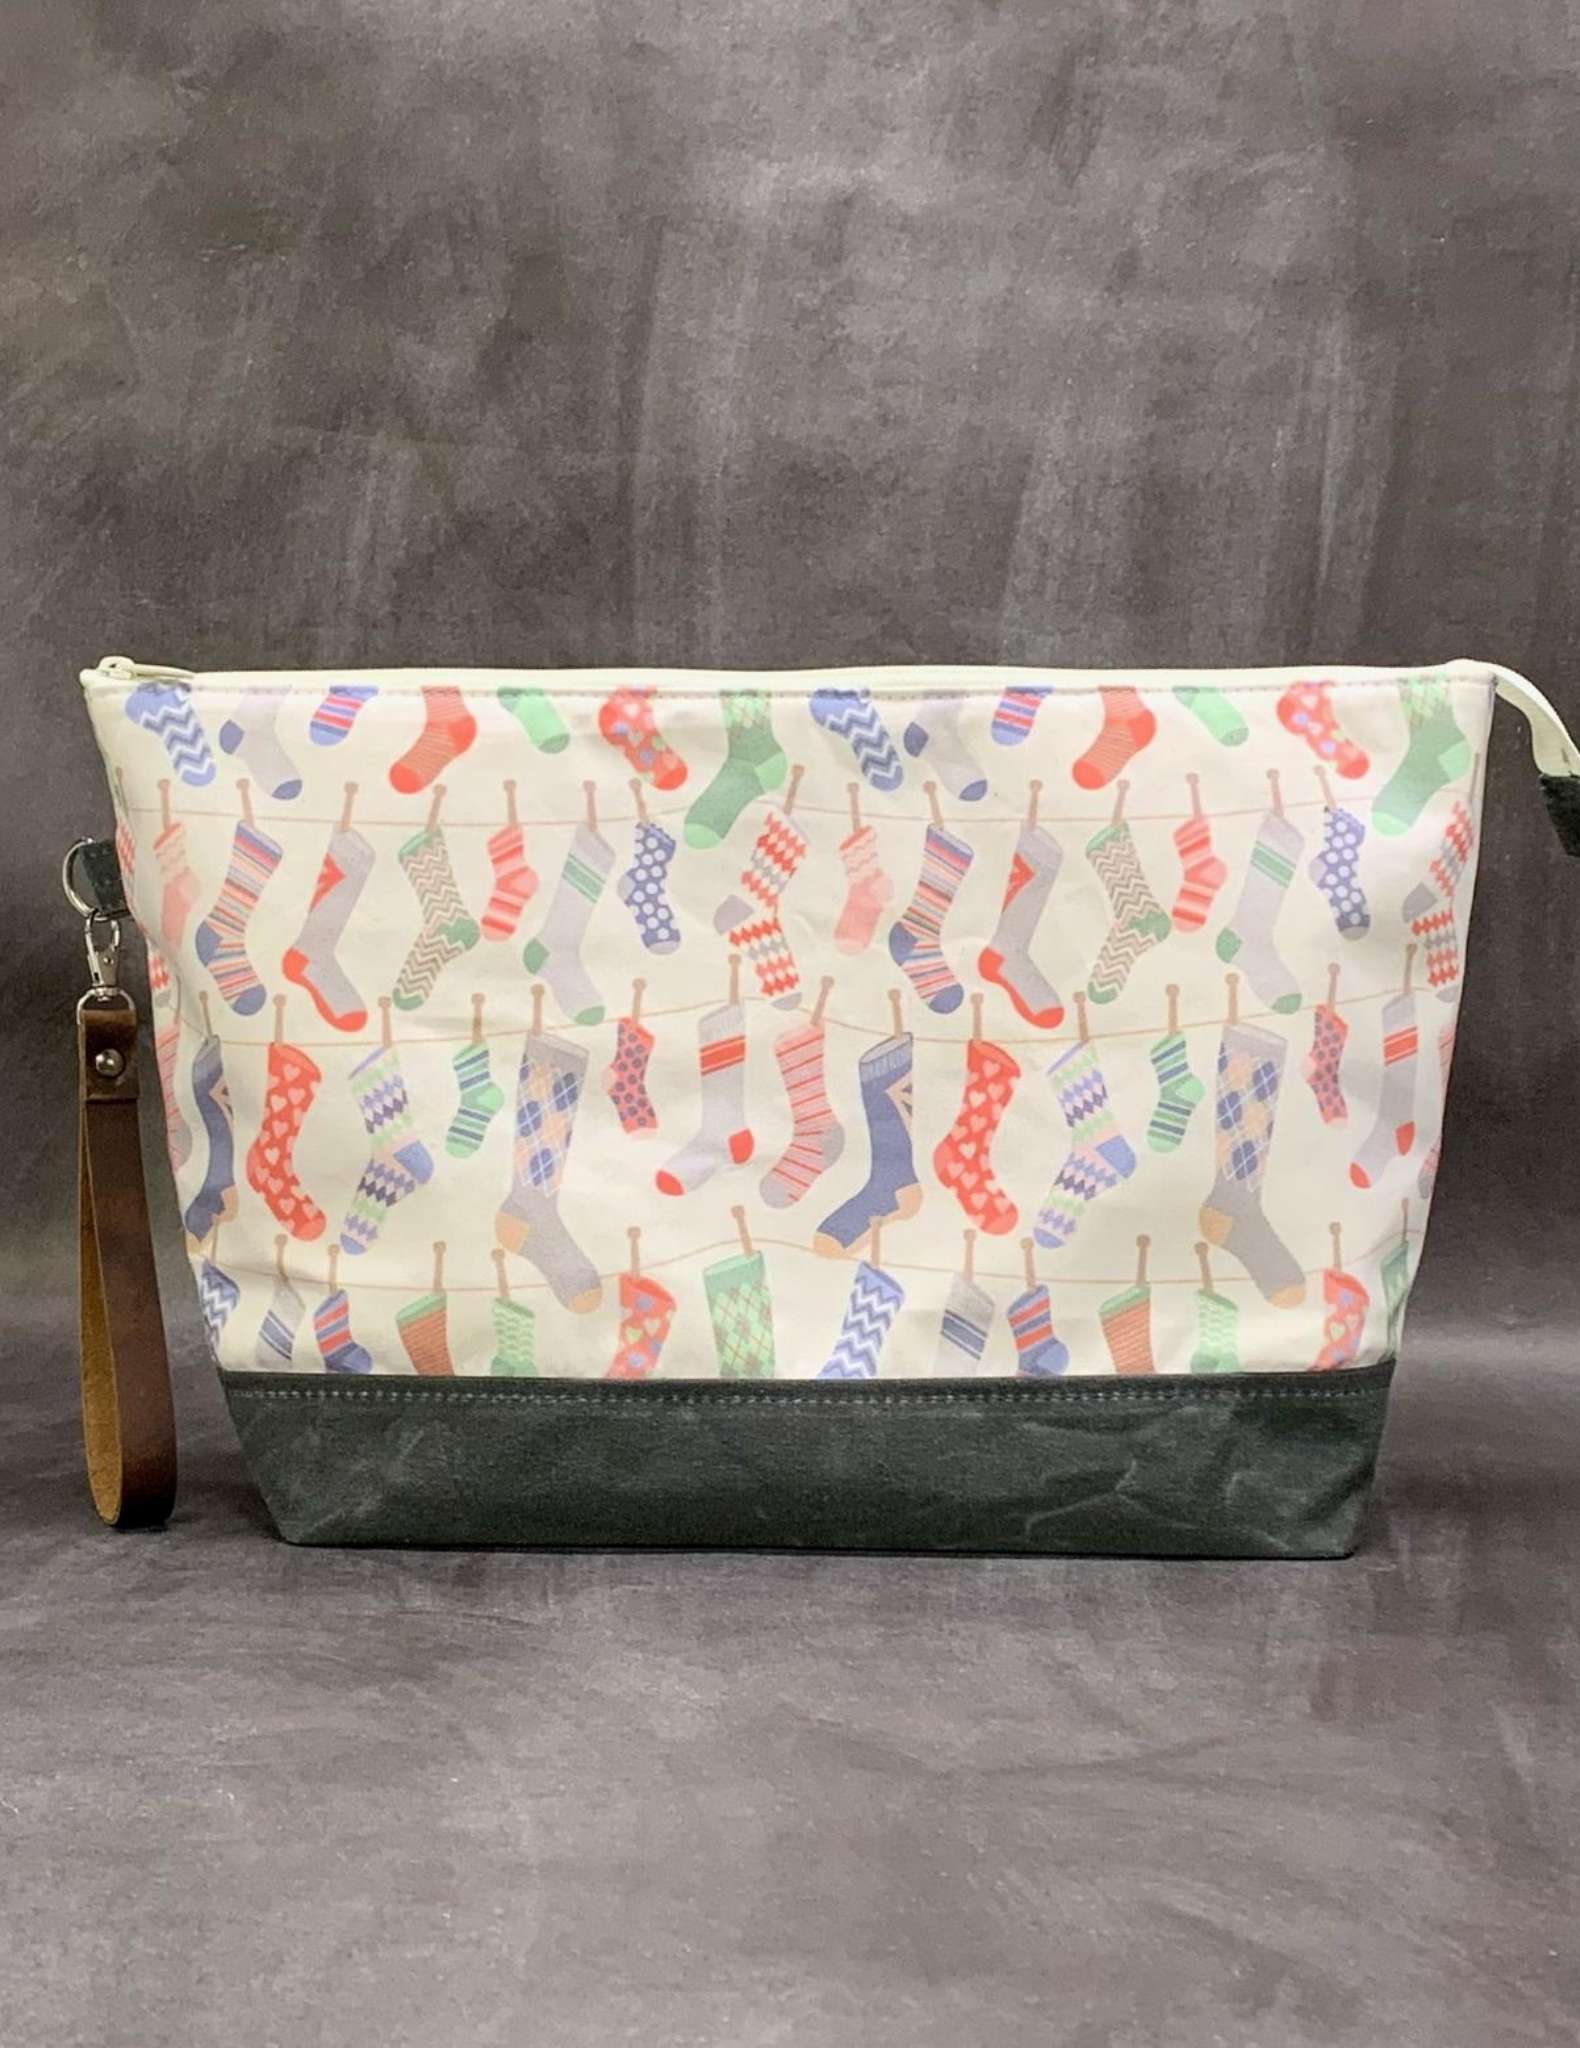 A project bag with zip made in a fabric print of hanging socks